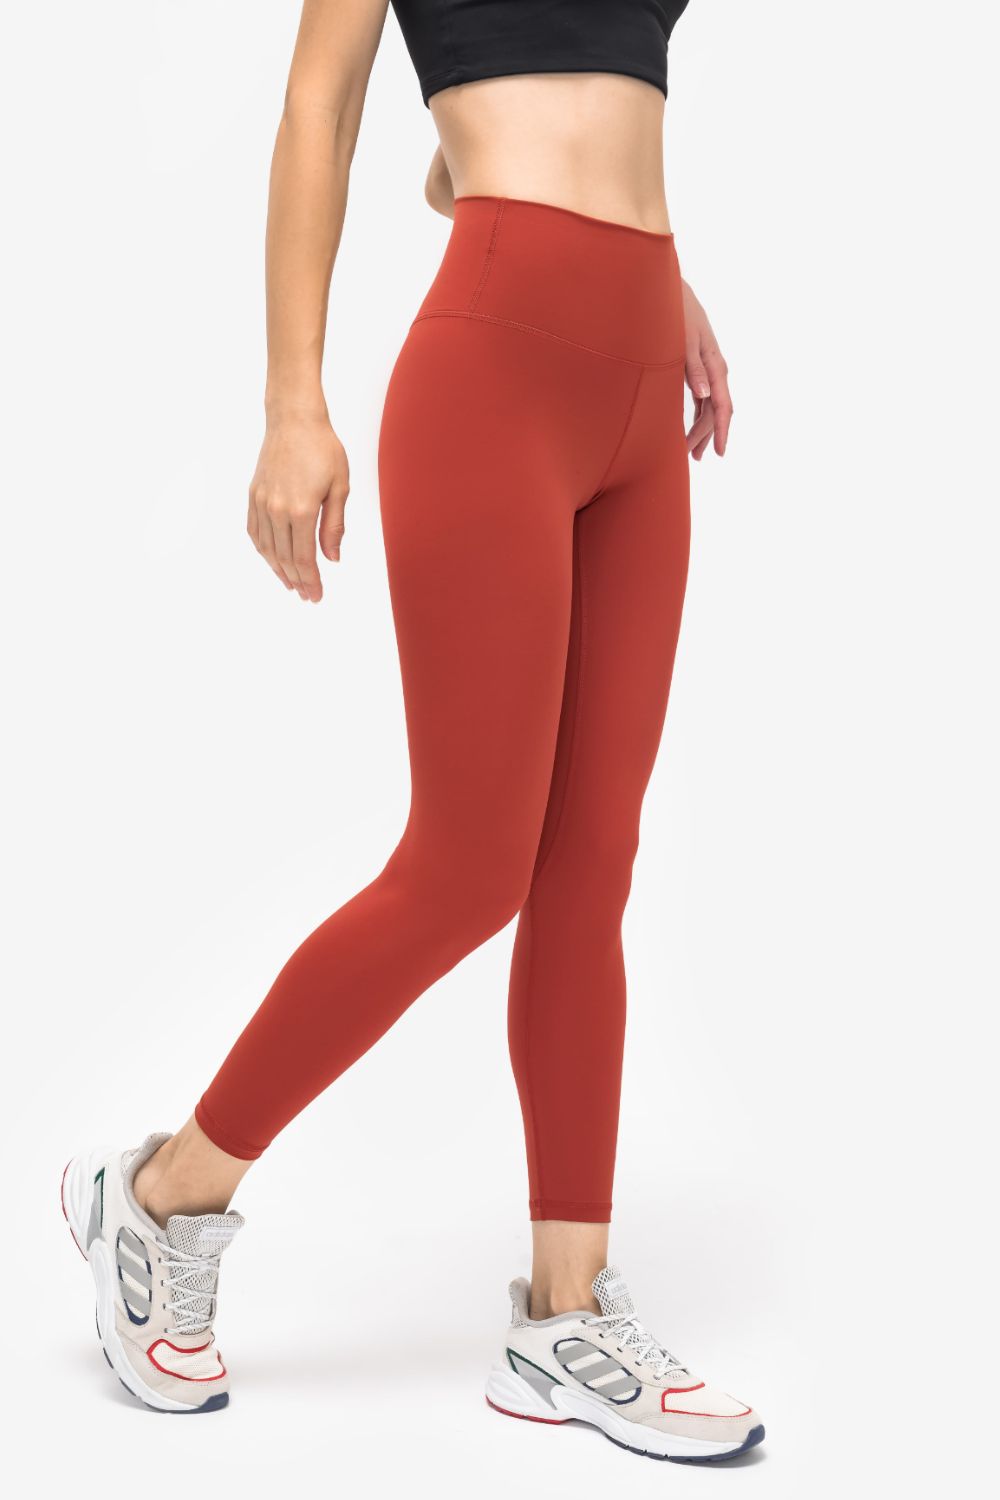 Invisible Pocket Sports Leggings - Runway Frenzy